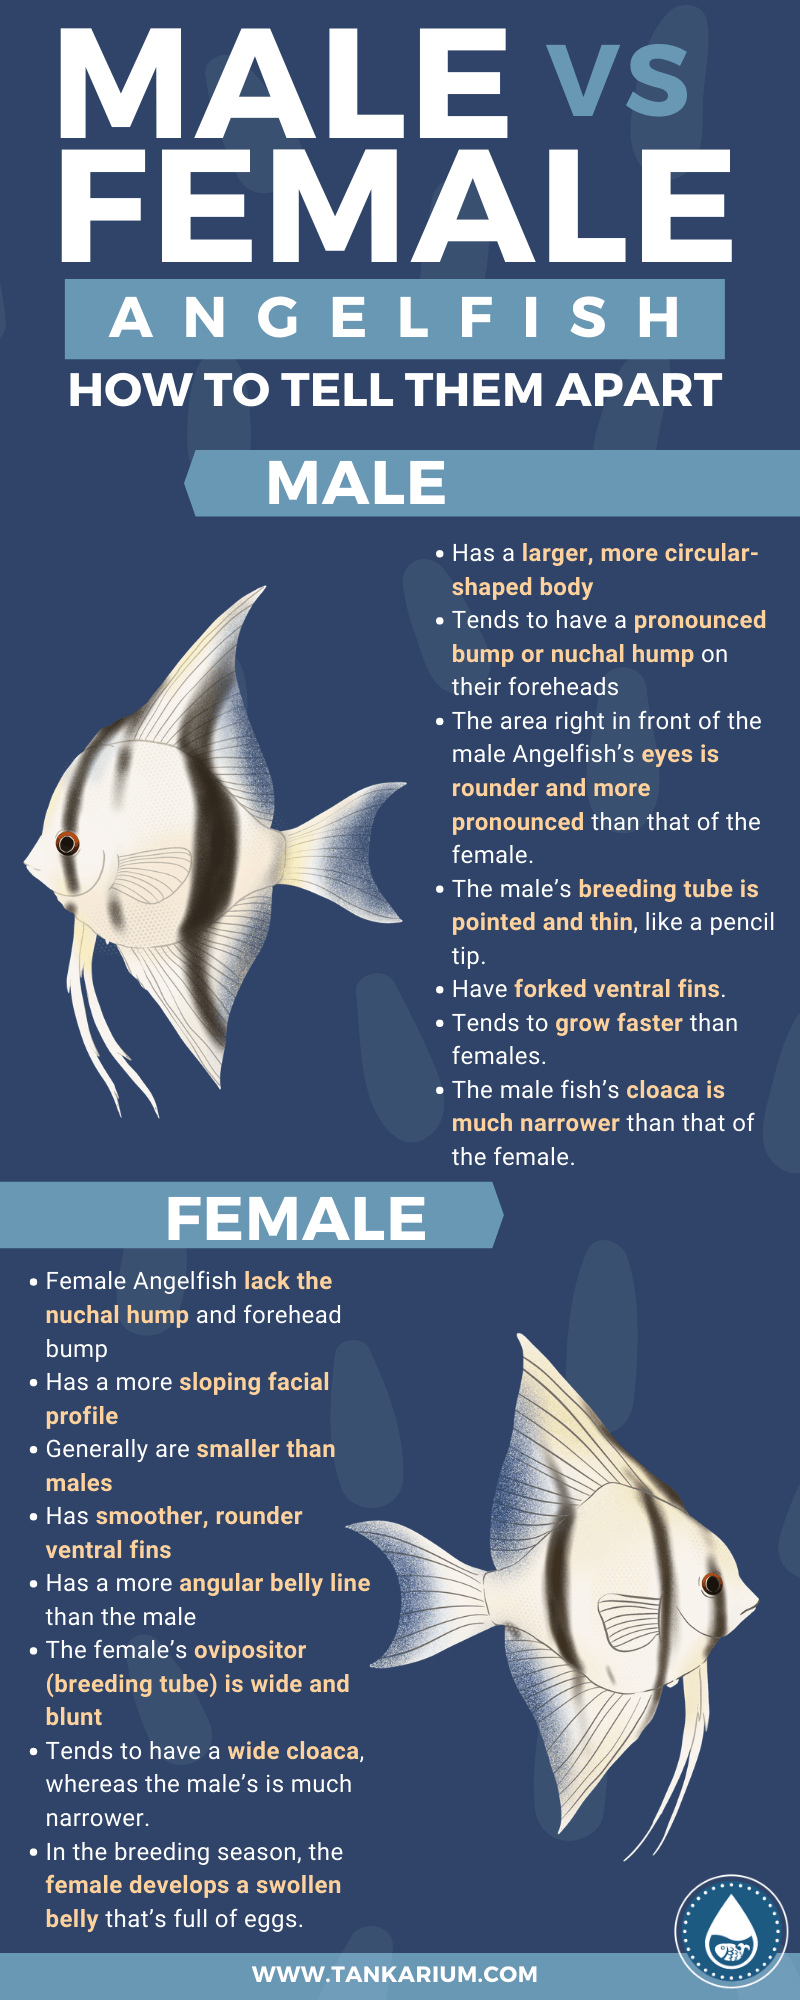 Male Vs. Female Angelfish How To Tell Them Apart - infographics